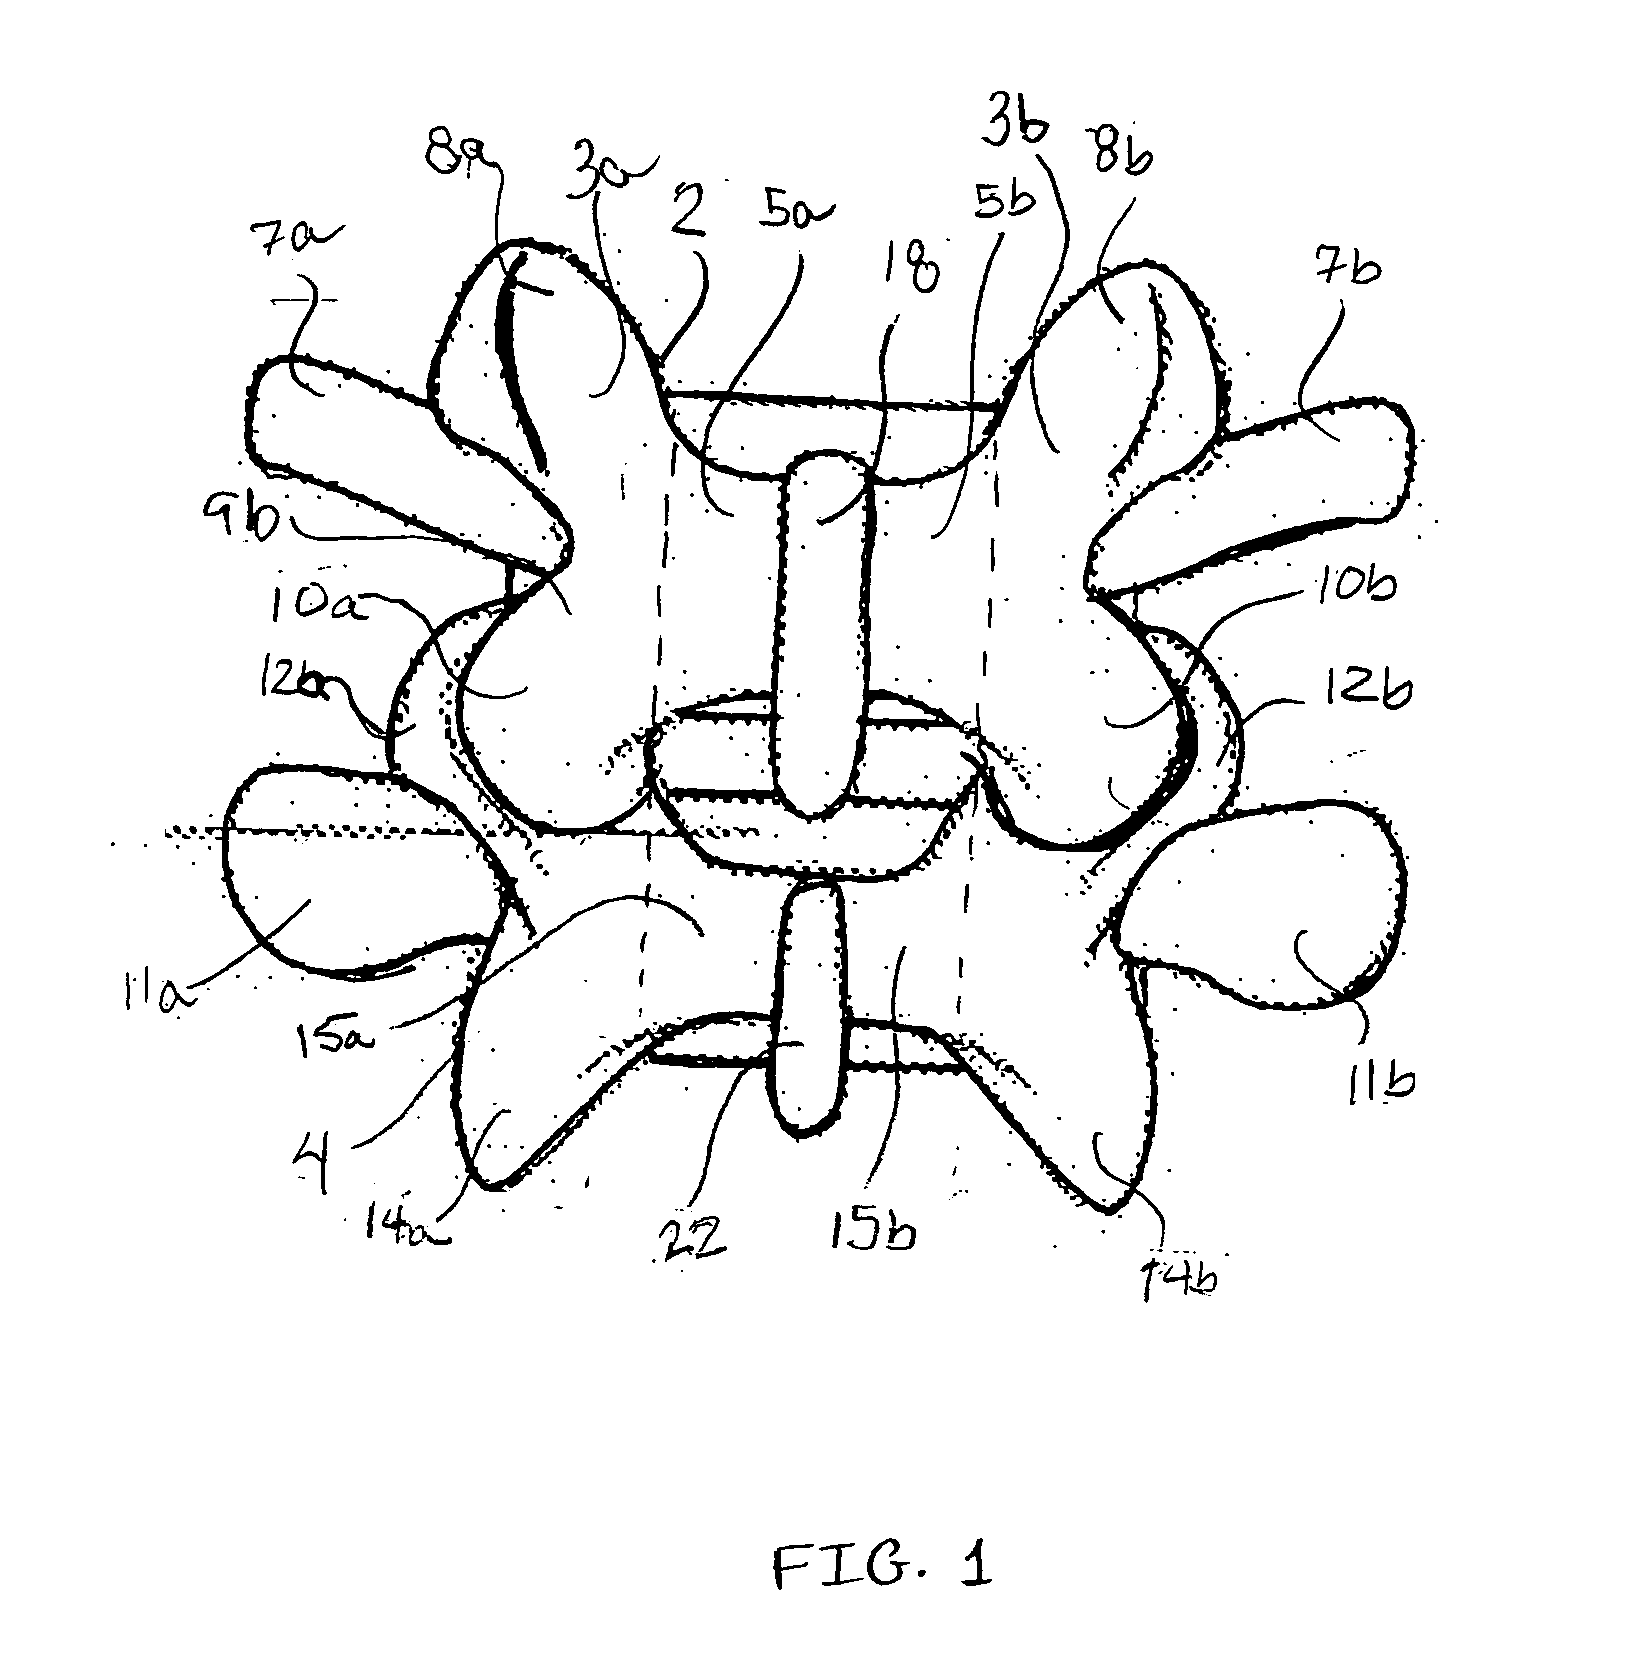 Systems and methods for stabilizing the motion or adjusting the position of the spine